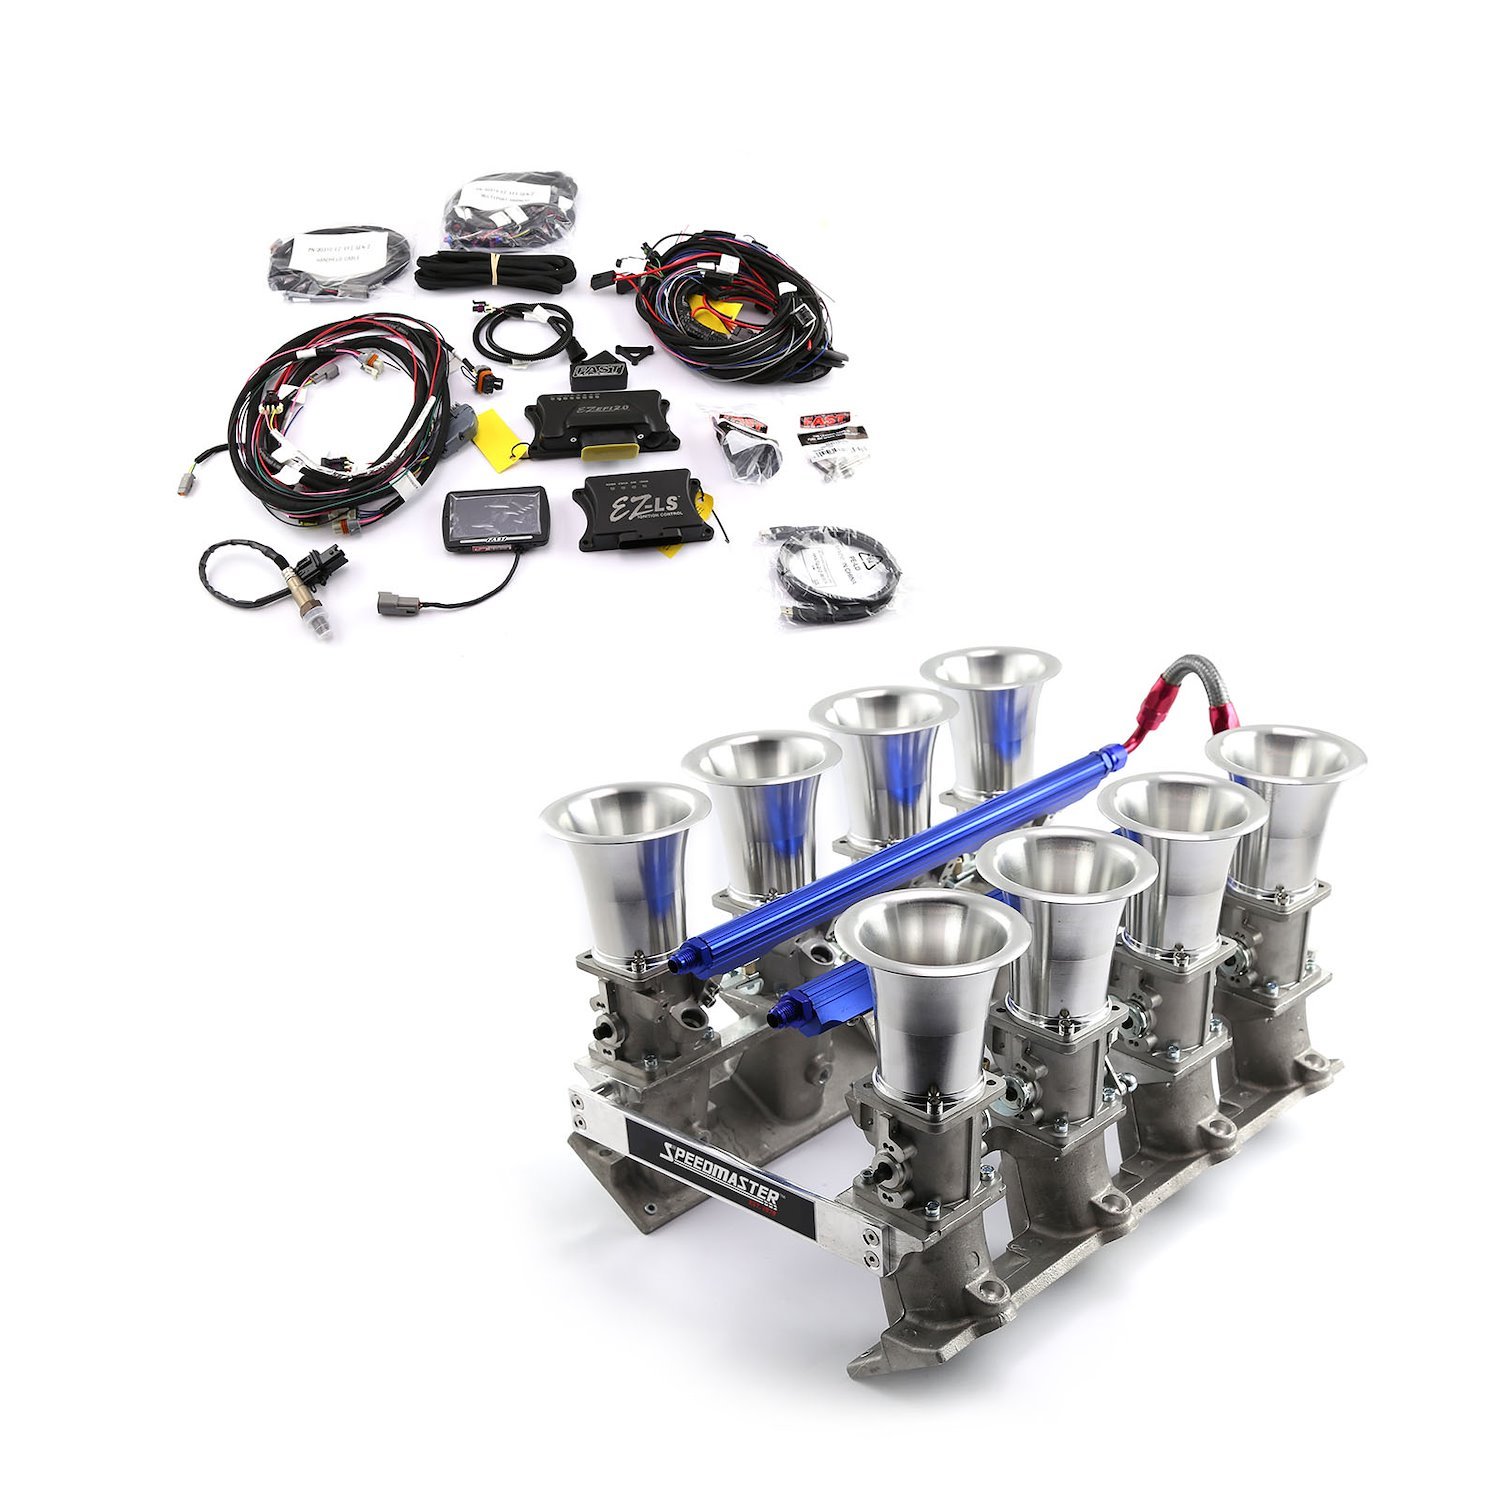 PCE148.1112 Chevy GM LS7 EFI Manifold & FAST EZ-EFI 2.0 Self-Tuning Fuel Injection System